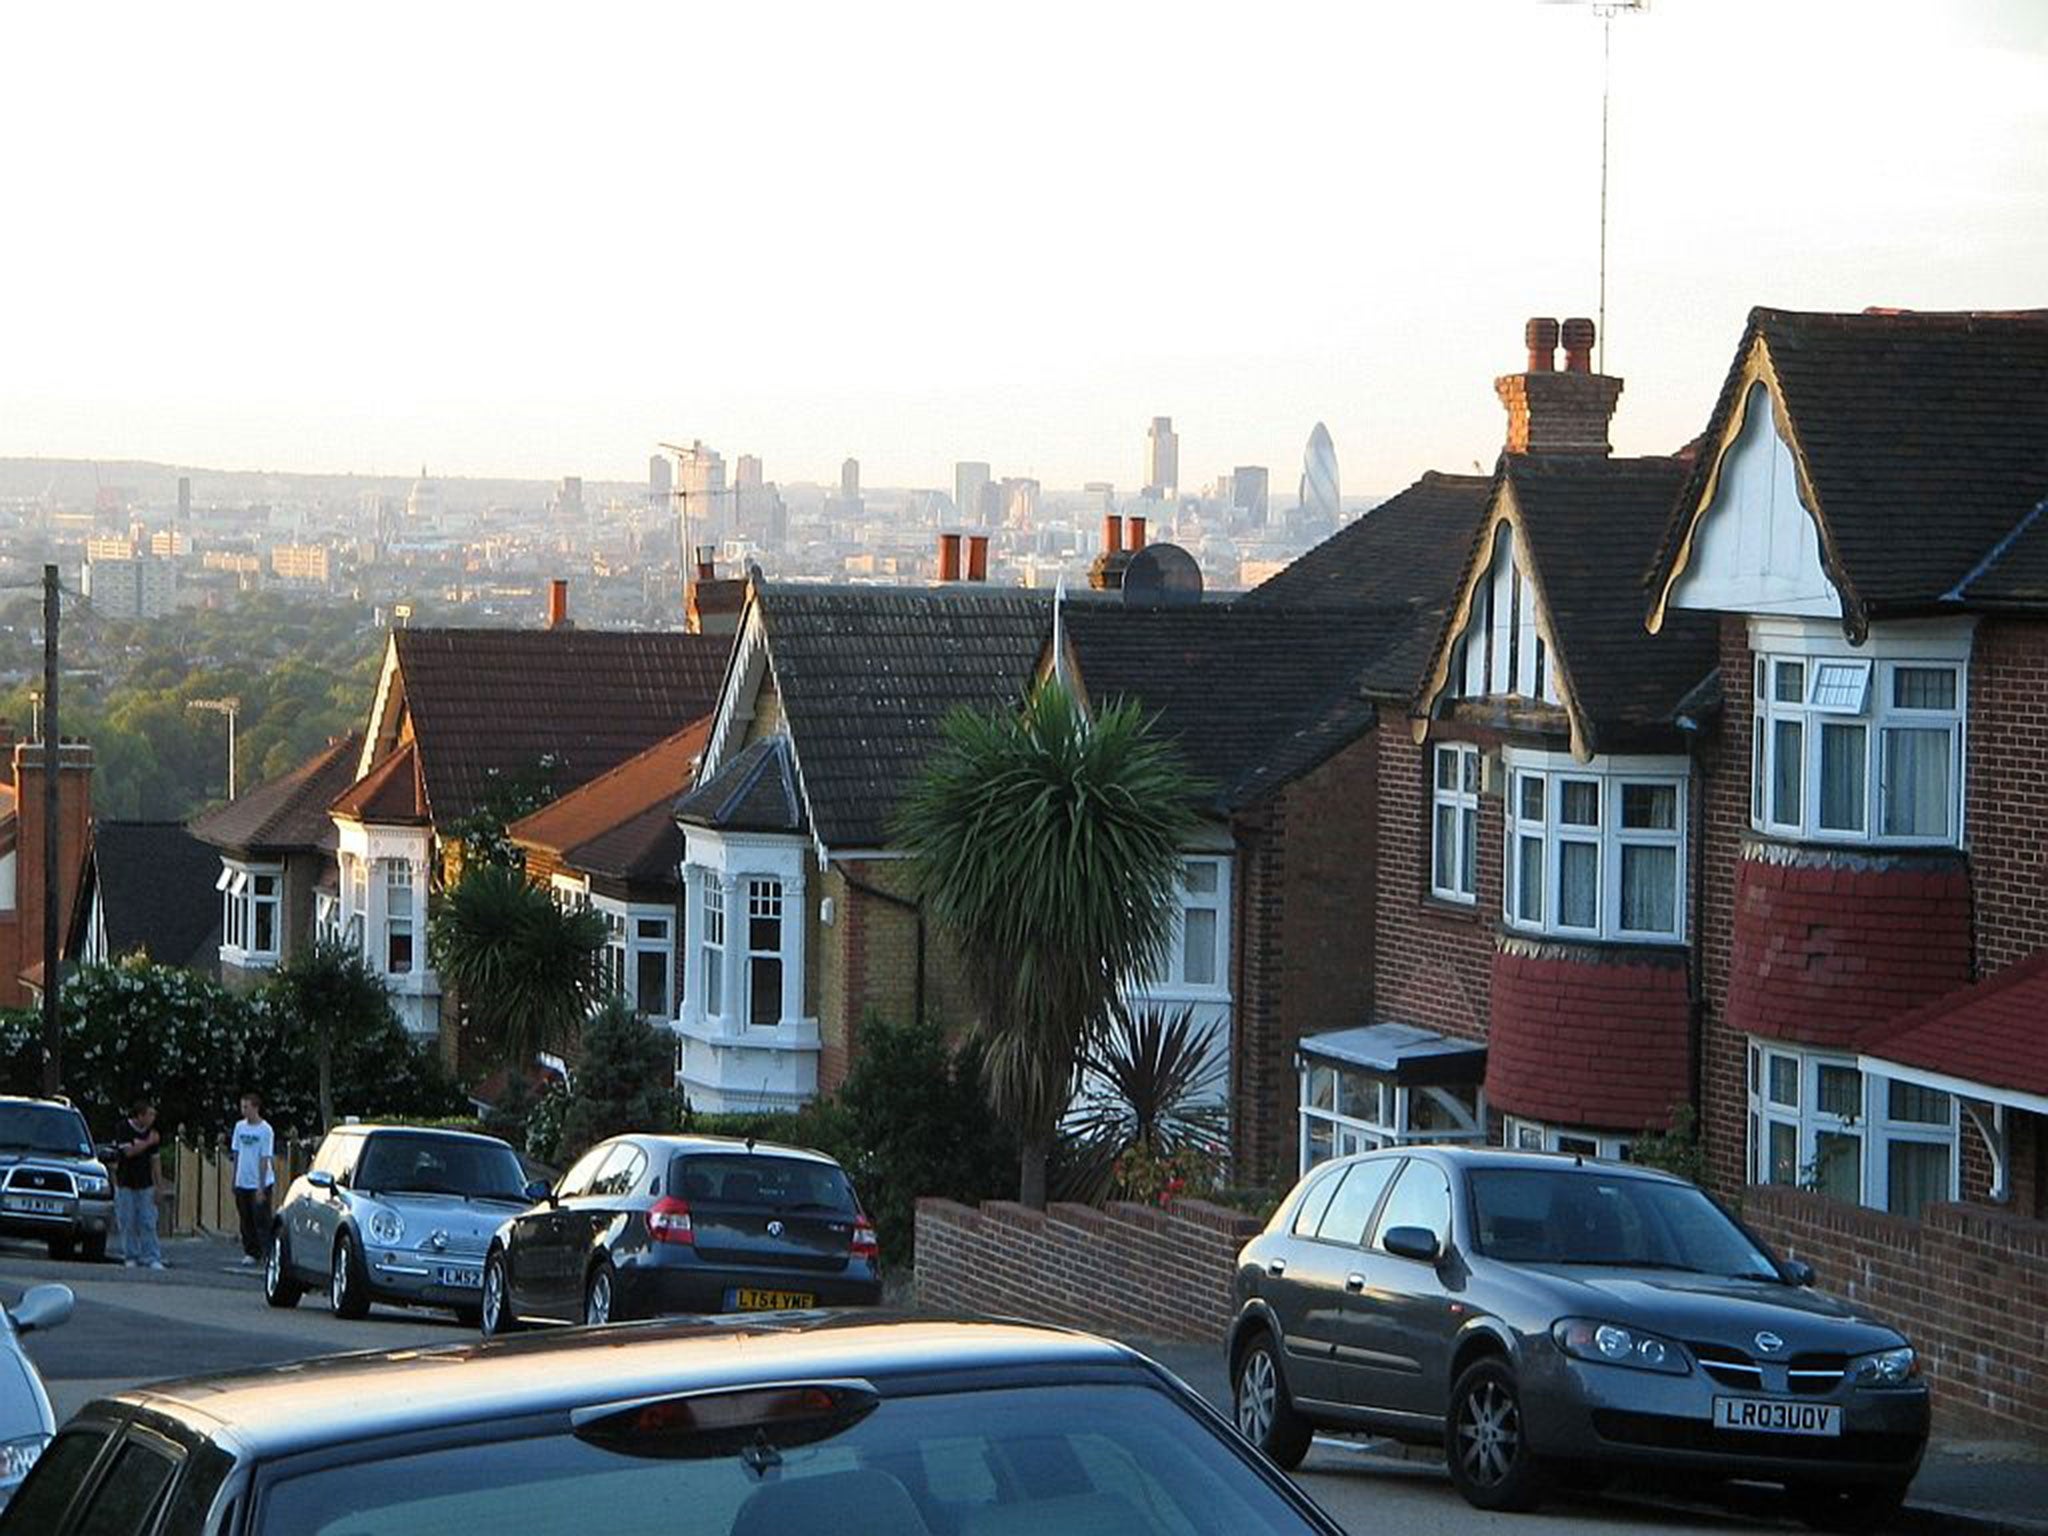 Shortage of supply and “robust” demand are continuing to put pressure on property prices